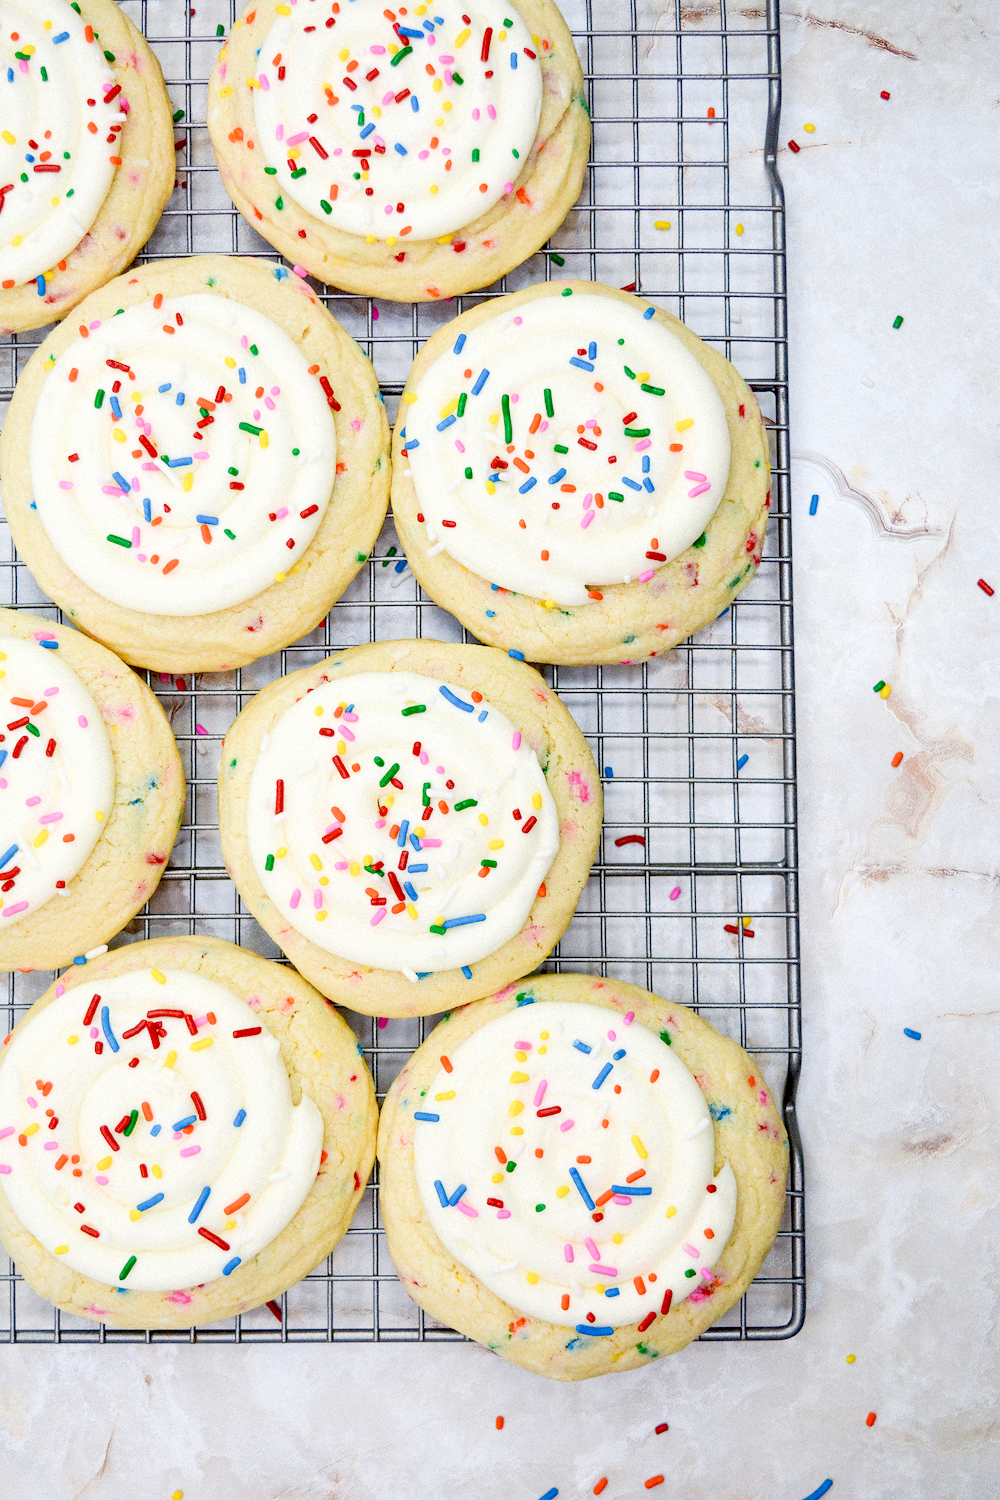 These Birthday Cake Cookies are soft and chewy cookie with the flavors of vanilla cake, topped with colorful sprinkles!